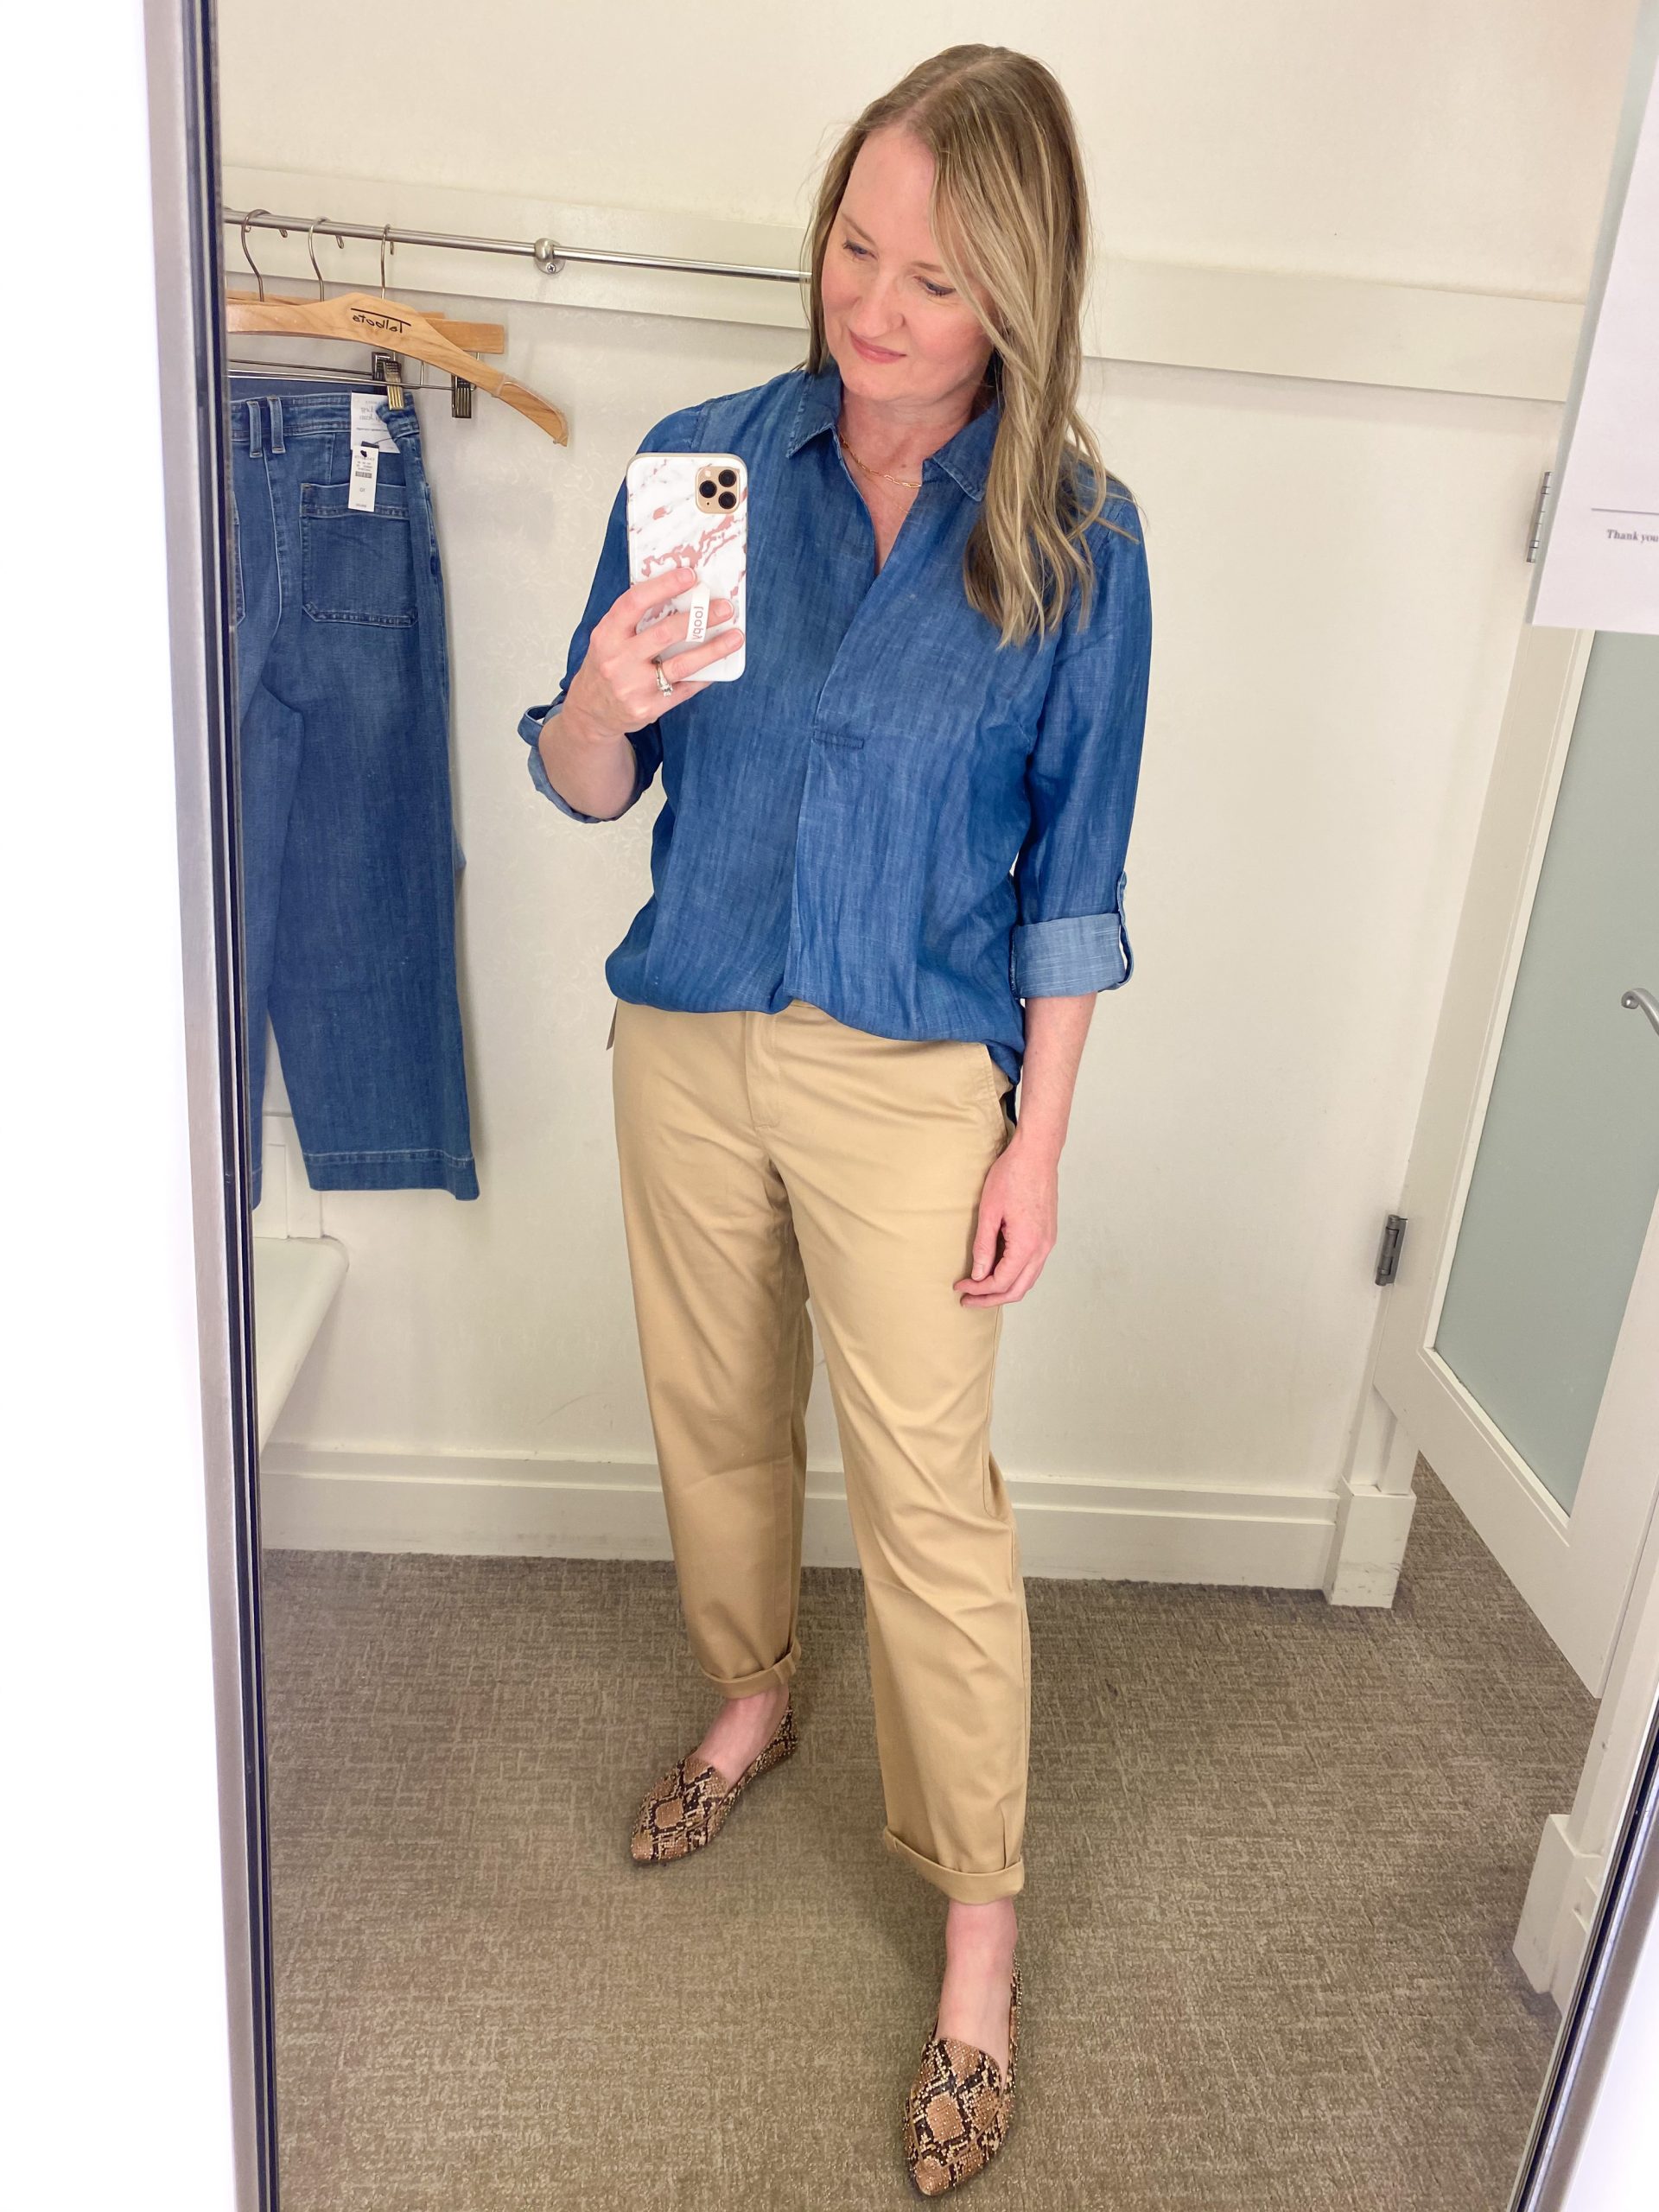 J.Crew Chino Shorts: Do I Still Actually Like Them? (A Try-On